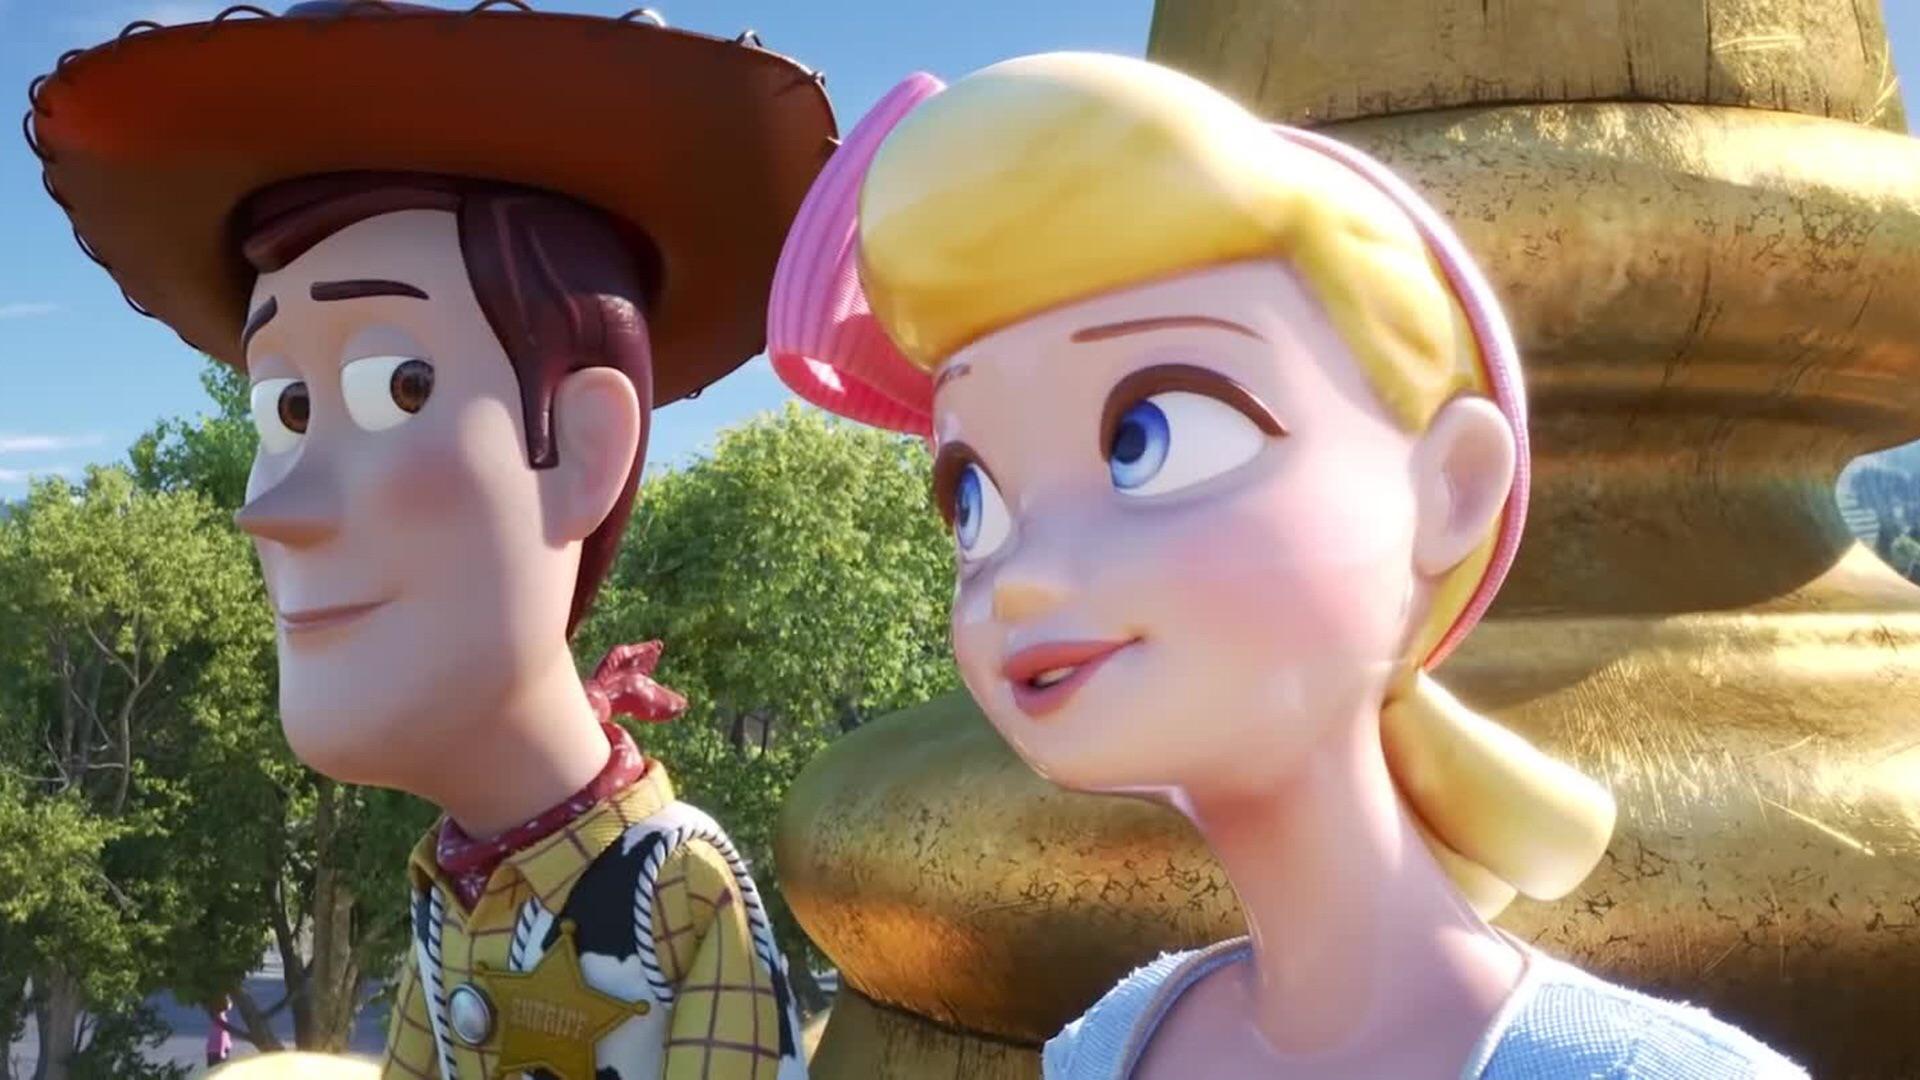 Find someone who looks at you the way Woody looks at Bo Peep